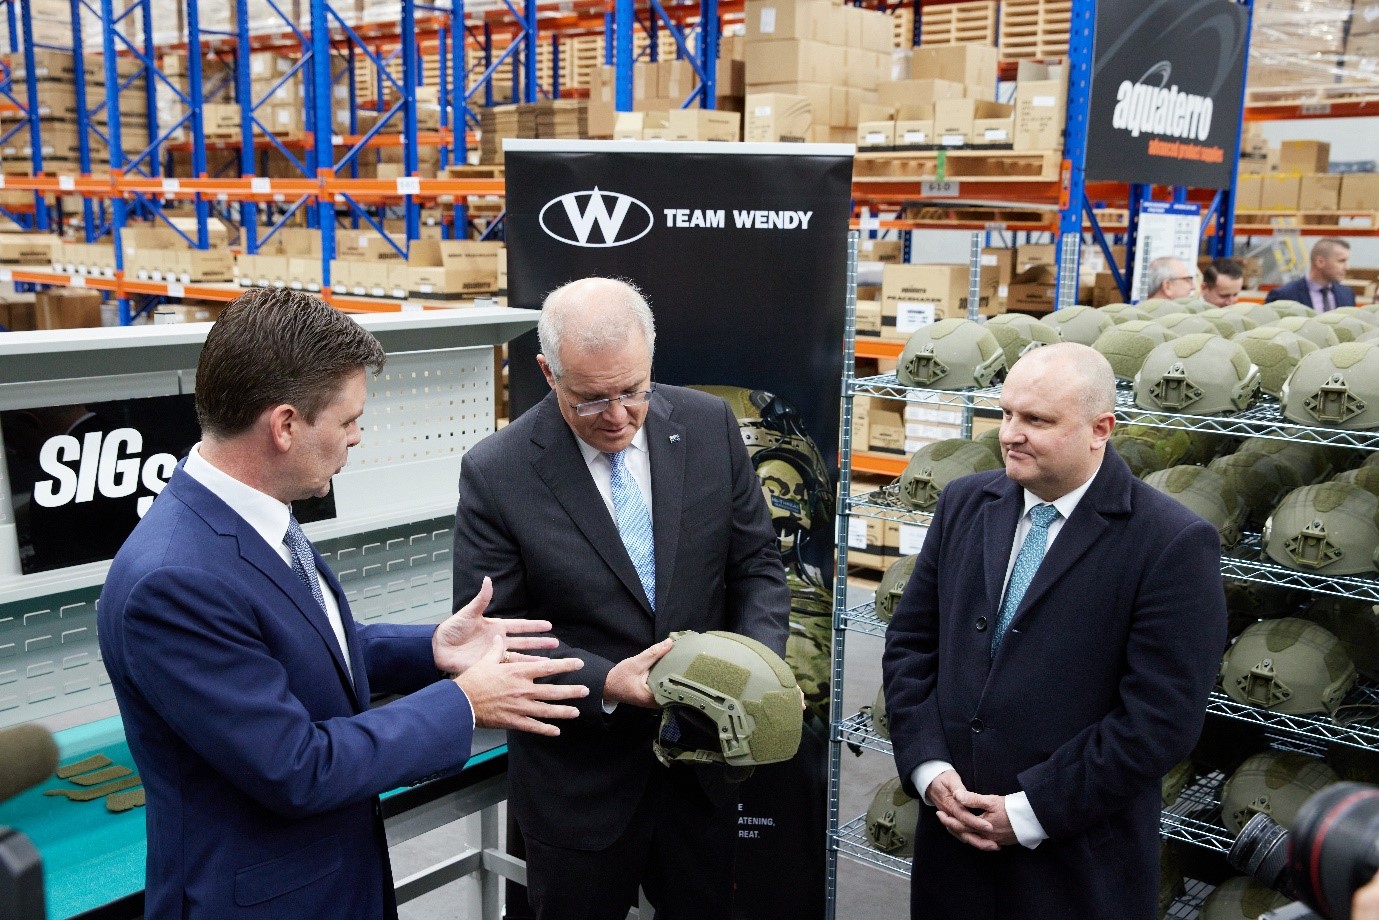 The HON Scott Morrison, Prime Minister of Australia, previewed Aquaterro’s refurbishment and SPPE capabilities during his visit to Aquaterro Headquarters in May 2021, where the Prime Minister was among the first to see the new Combat Ballistic Helmet Technical Inspection and Refurbishment process, now operating within the new Building 2. 